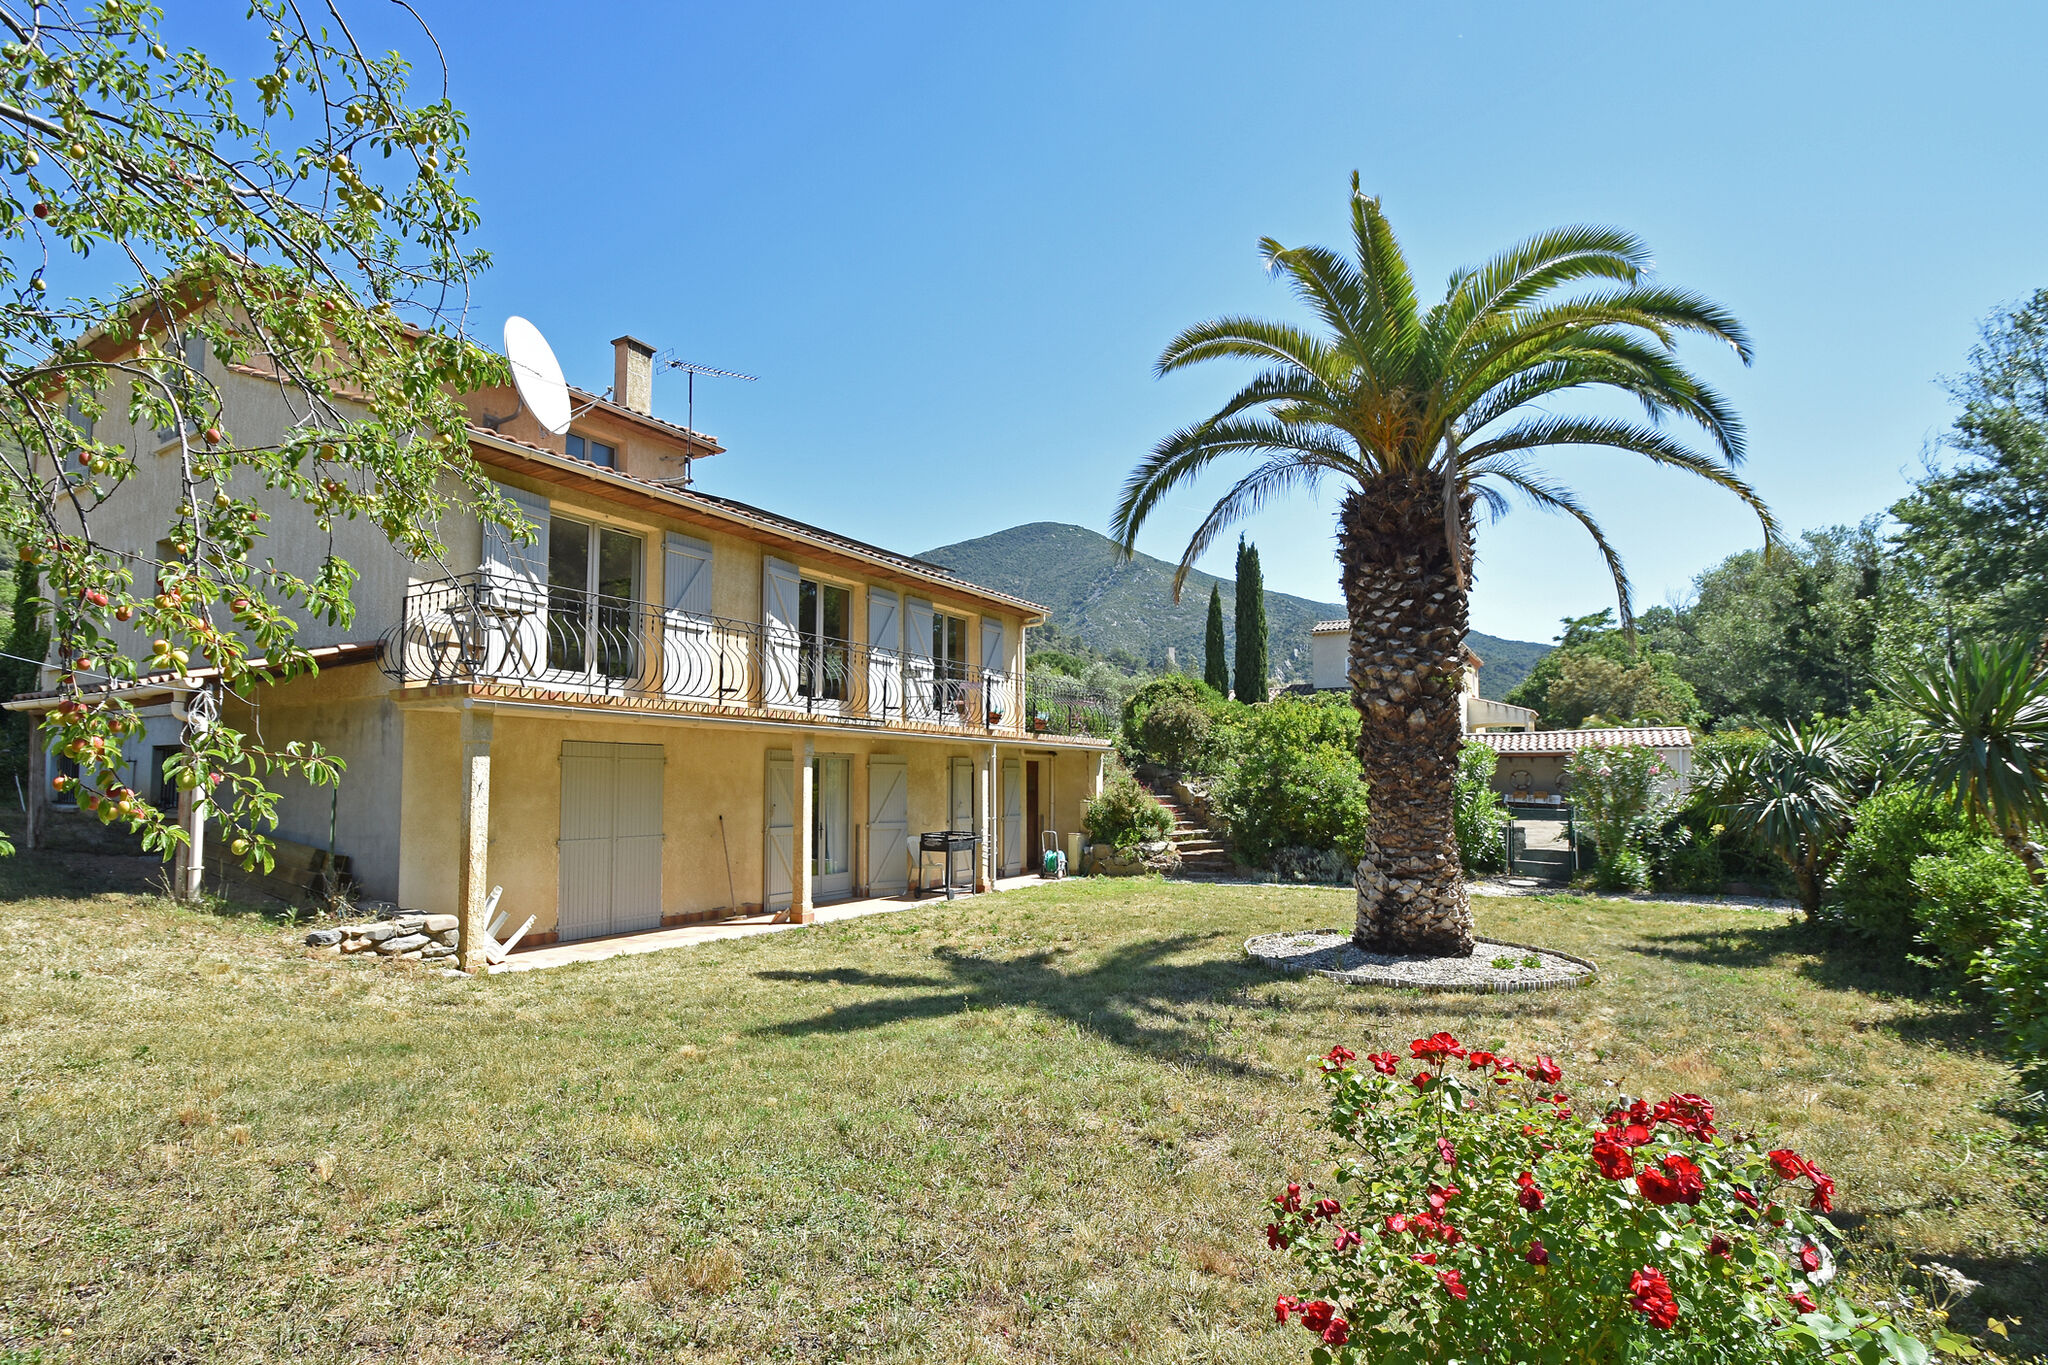 Child & dog friendly villa with private swimming pool and fenced garden on the river